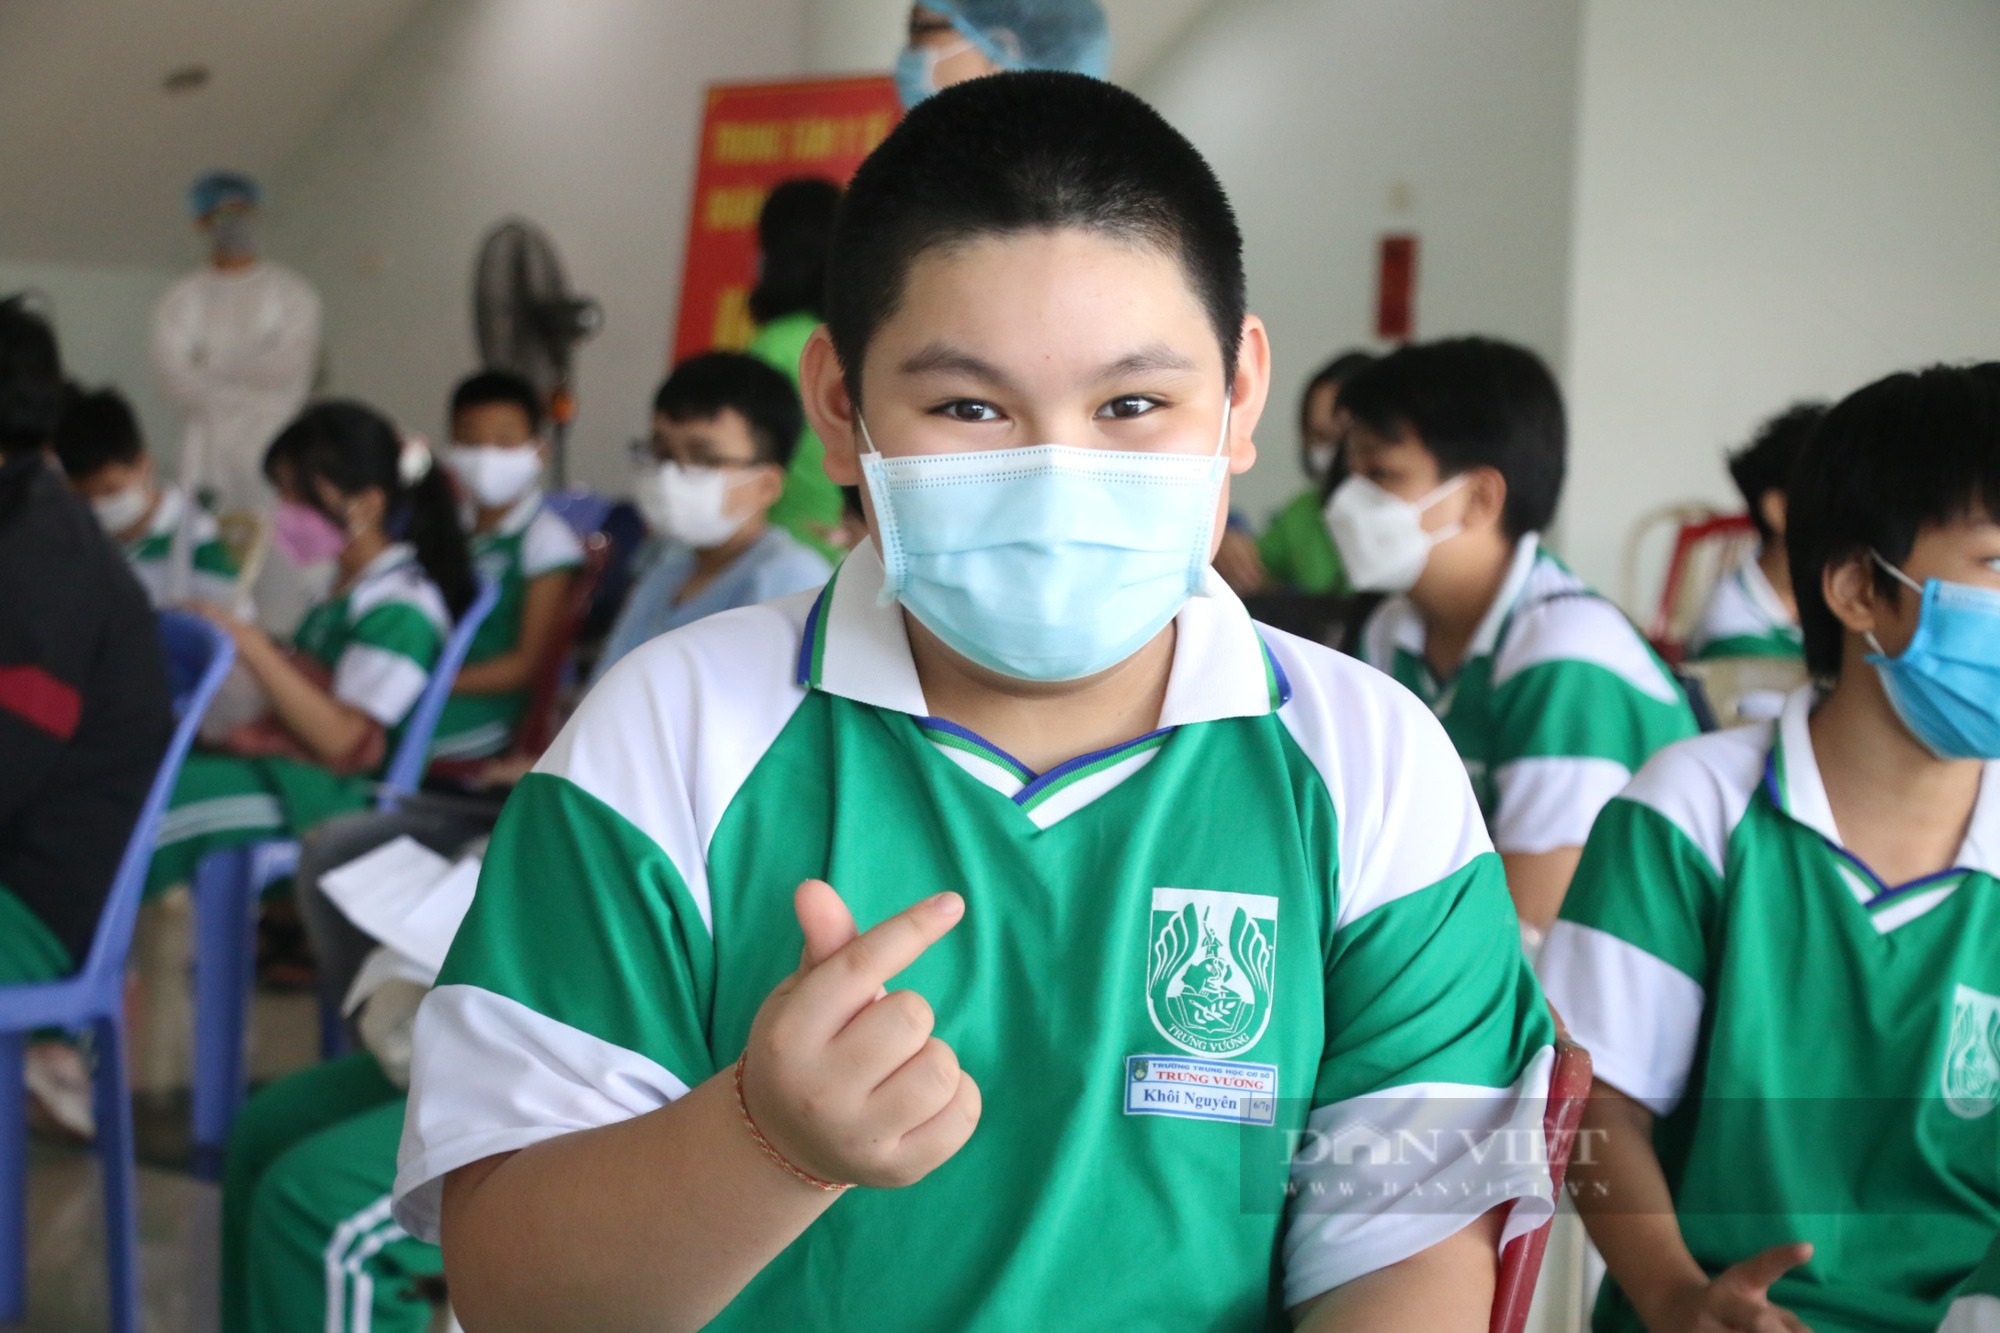 Da Nang: Parents wake up early, leave work to take their children to get Covid-19 vaccine - Photo 6.